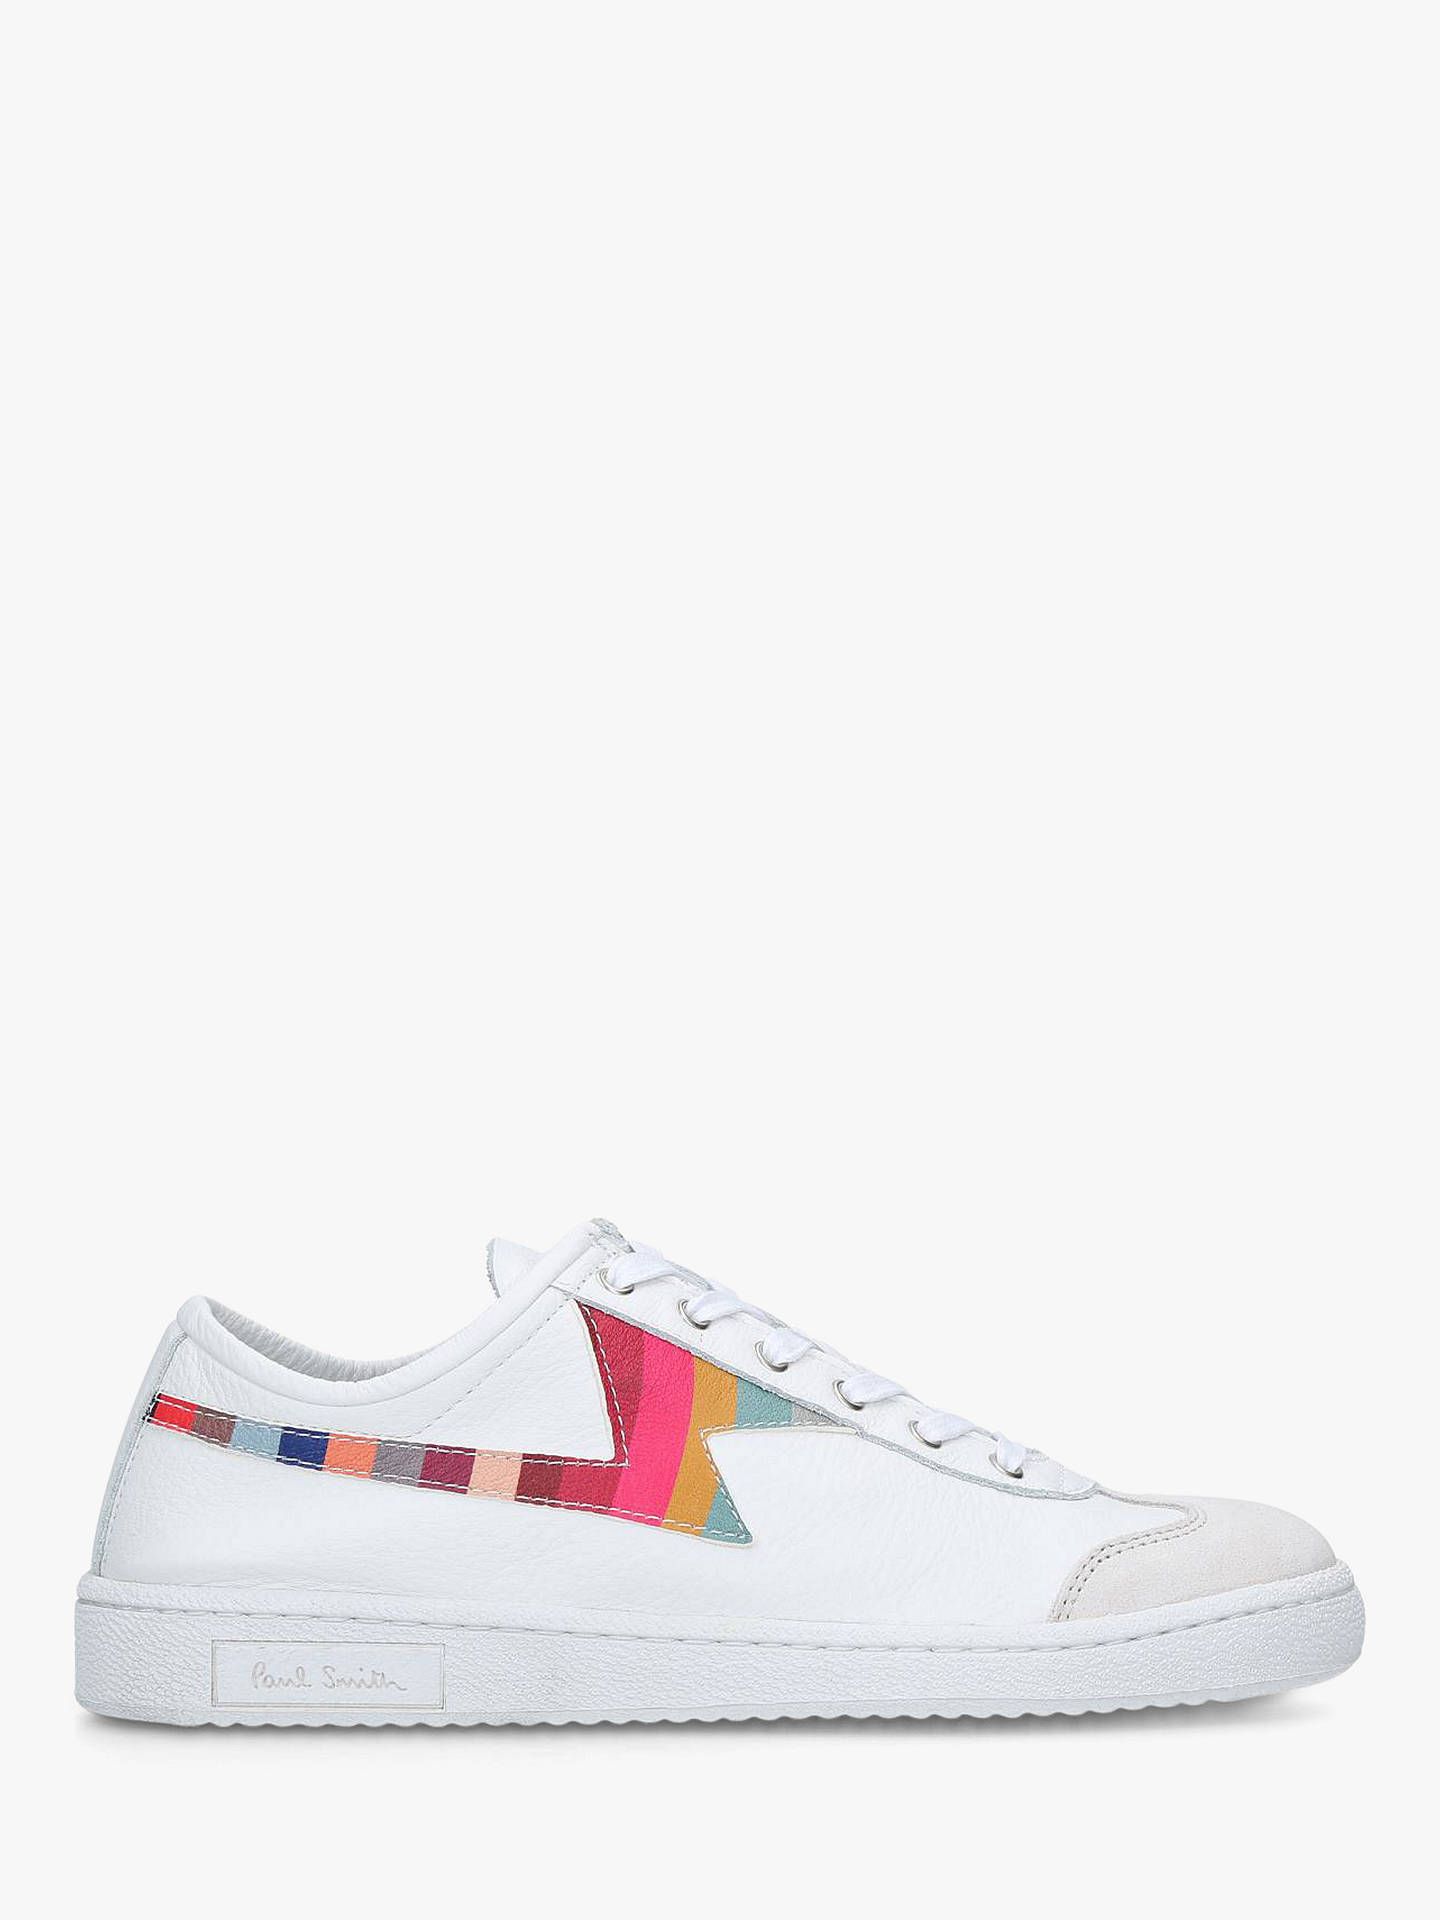 Paul Smith Ziggy Low Top Trainers, White Leather/Multi at John Lewis ...